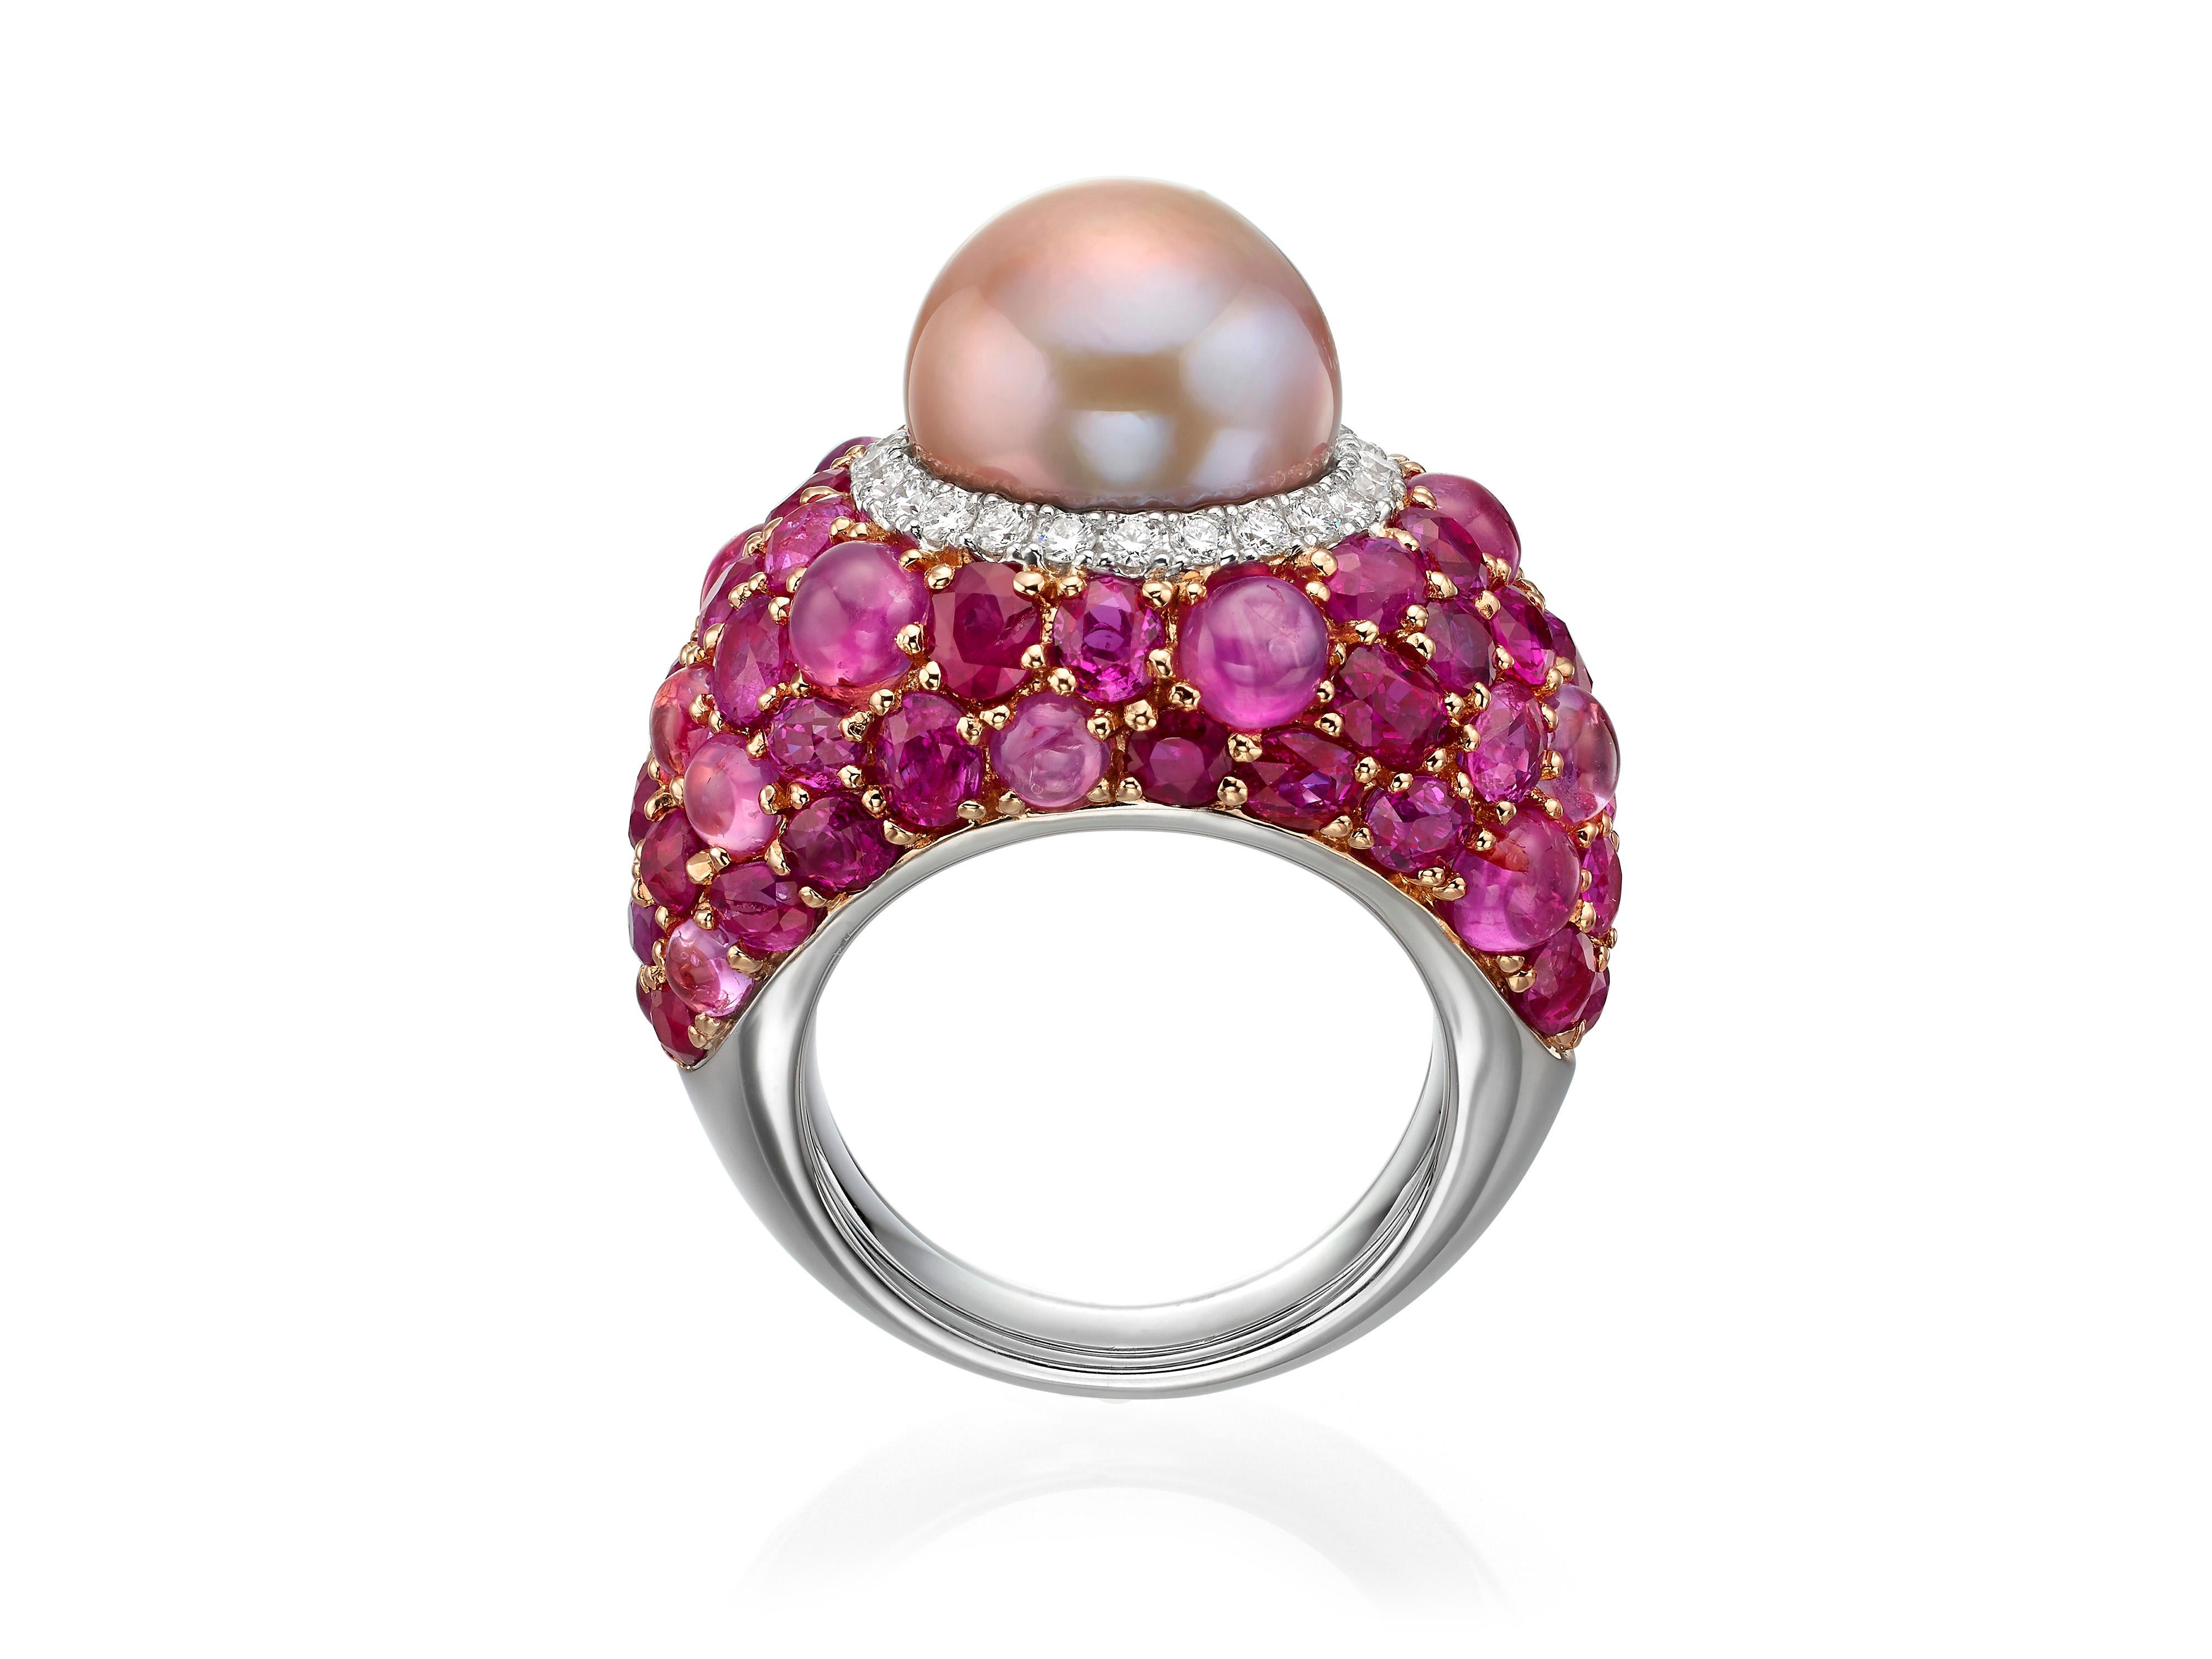 Crafted from 18K rose gold, this cocktail ring features a 13MM freshwater pink pearl at the center surrounded by a halo of white diamonds (totaling 0.51 carats) and a clusters of pink sapphires and rubies (totaling 17.80 carats).  Currently a ring